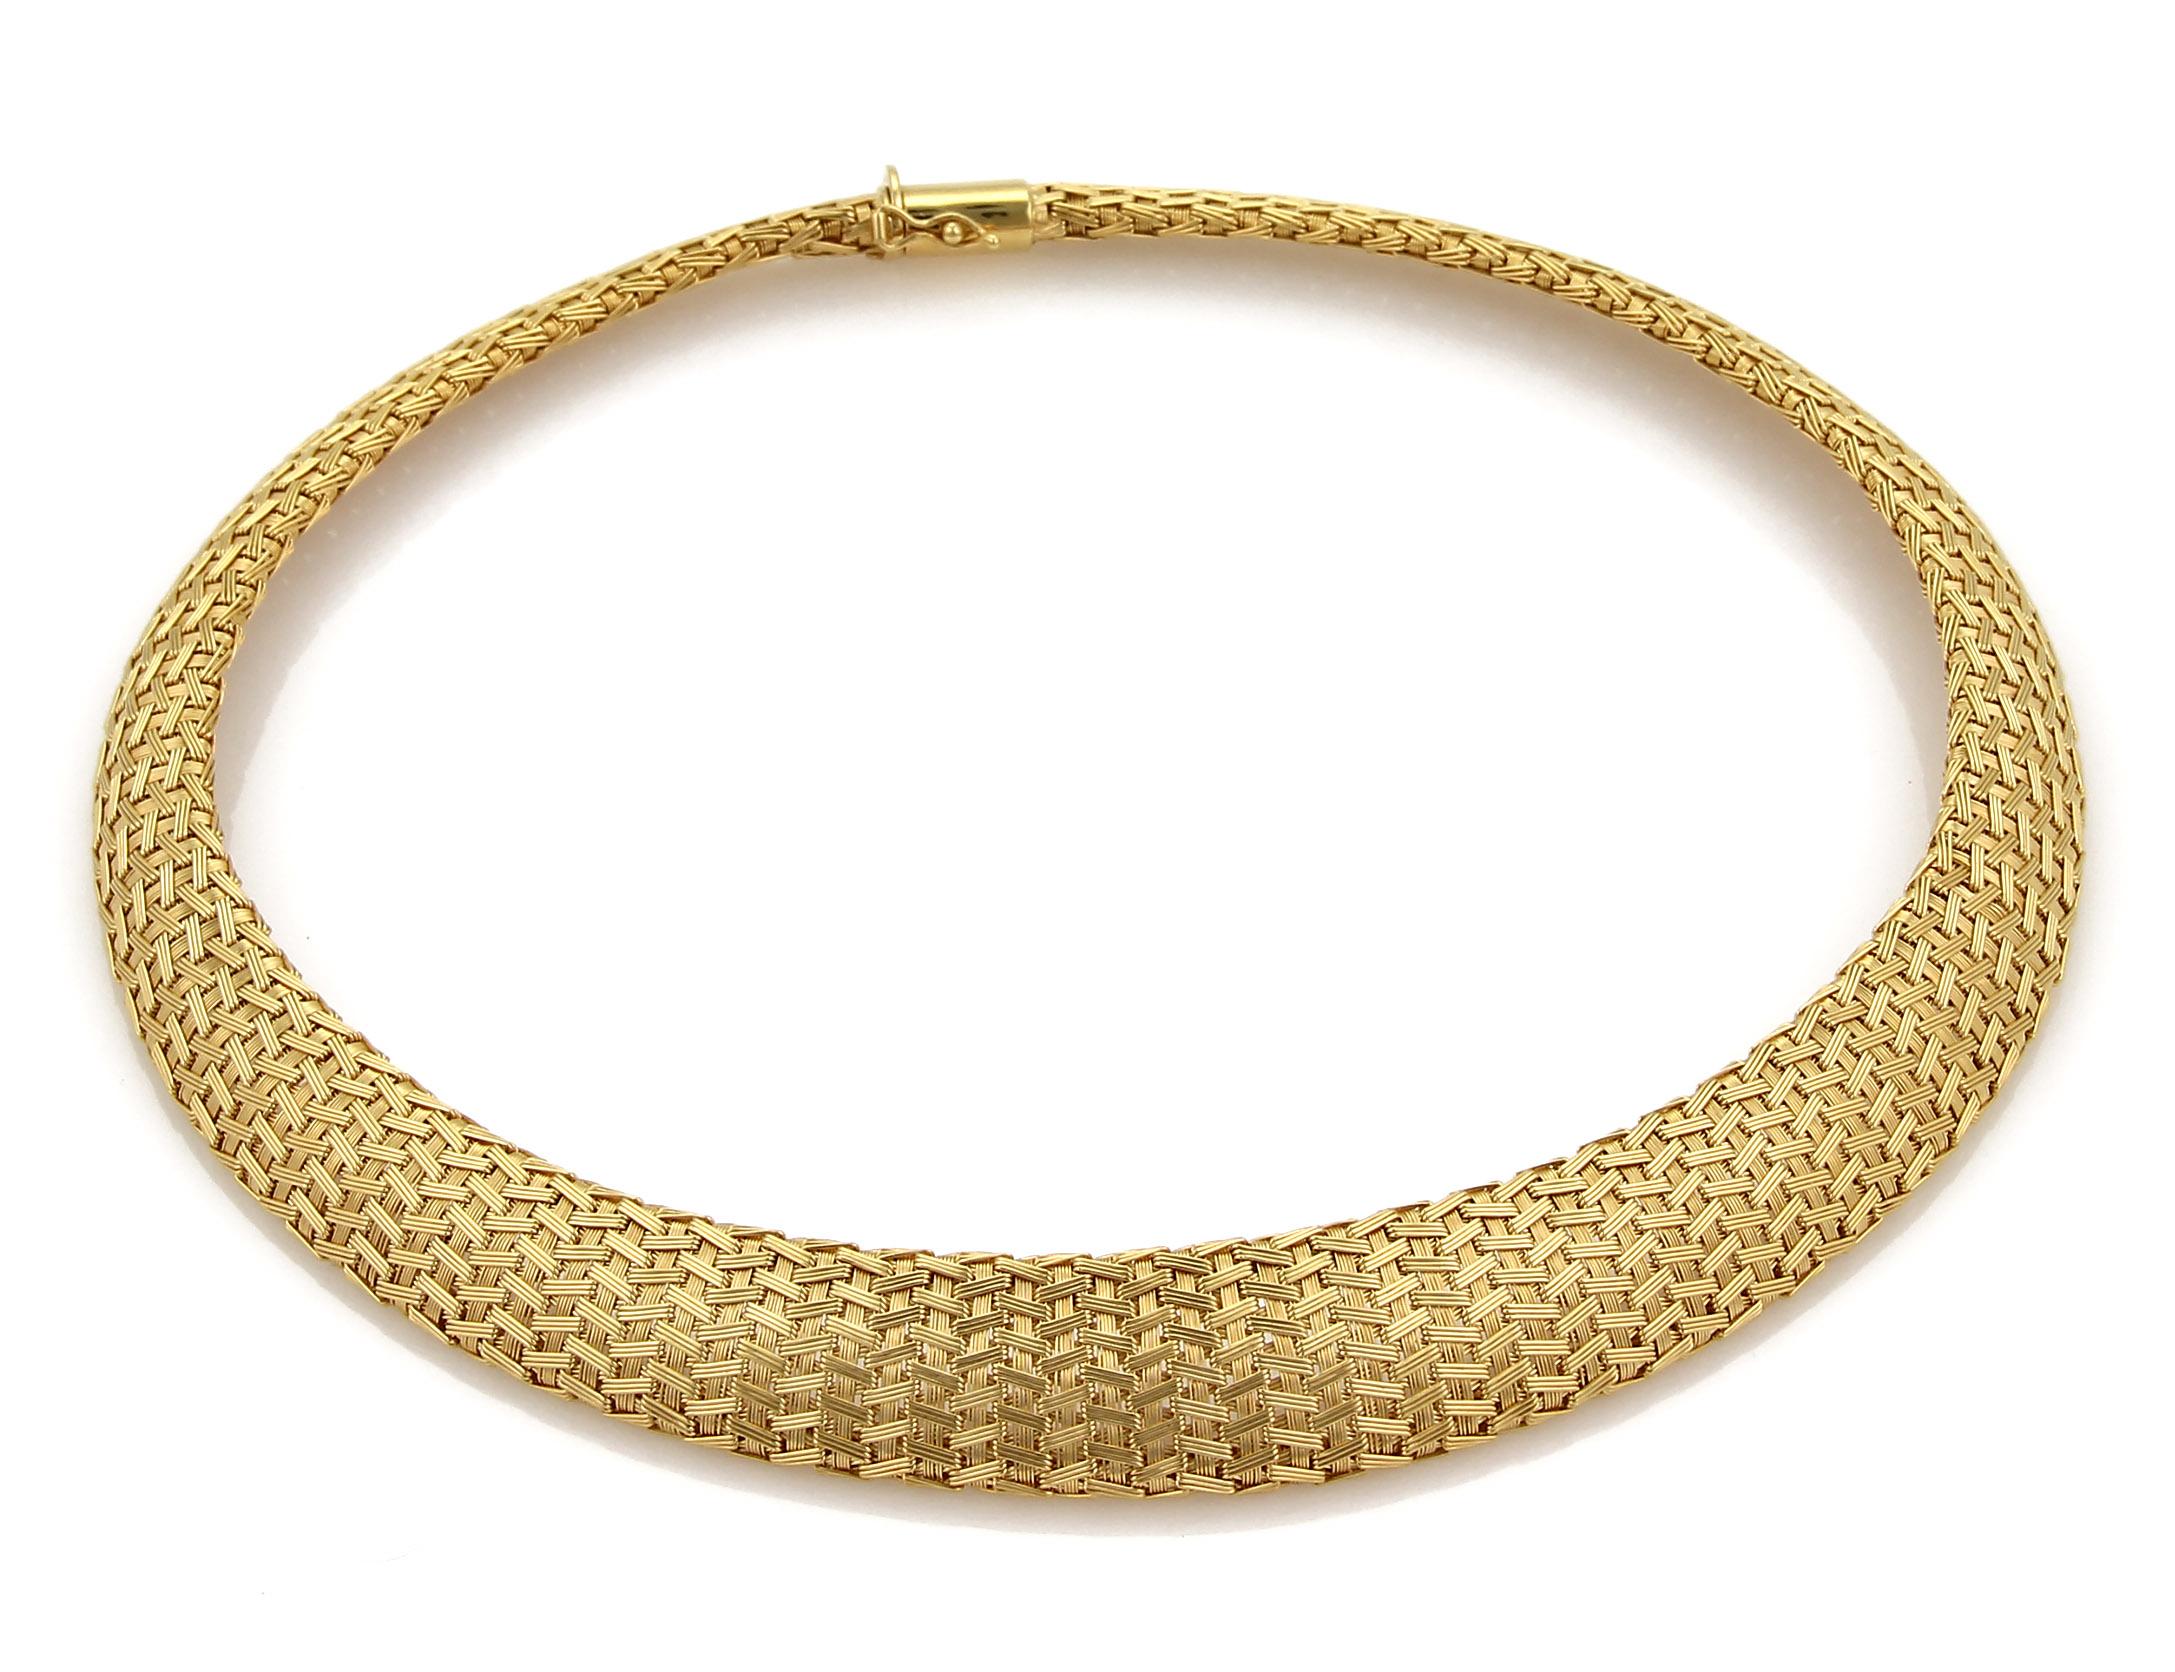 This is a gorgeous vintage collar necklace by Roberto Coin.  It is crafted from solid 18k yellow gold with a silk woven design in a graduated size, wide from the center and tapers off smaller at each end.  The semi dome form lay flat against your